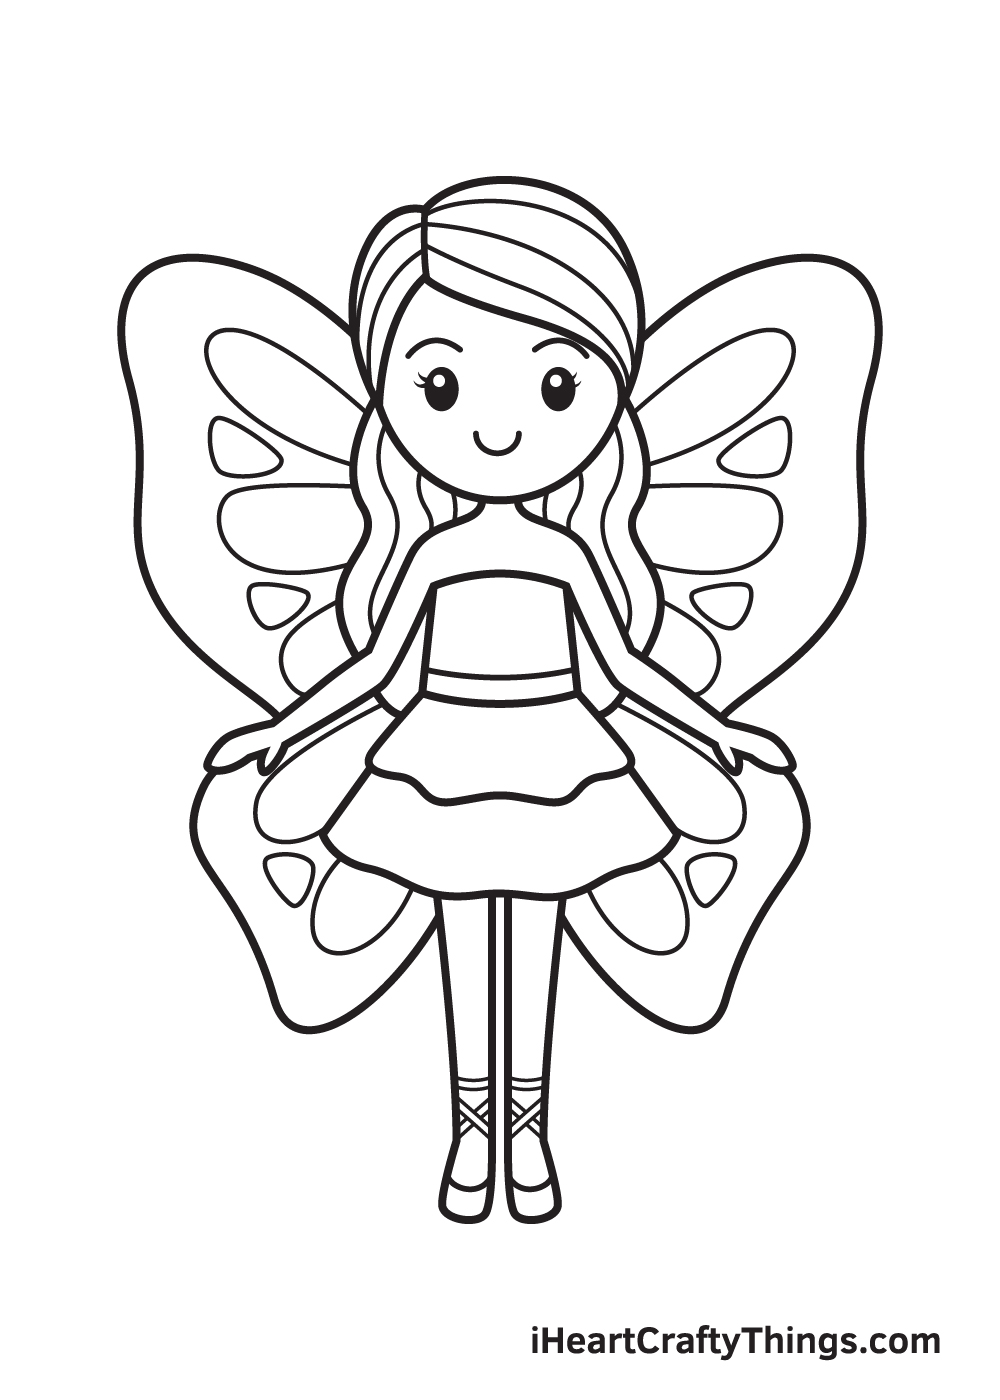 Drawing fairy - Step 9